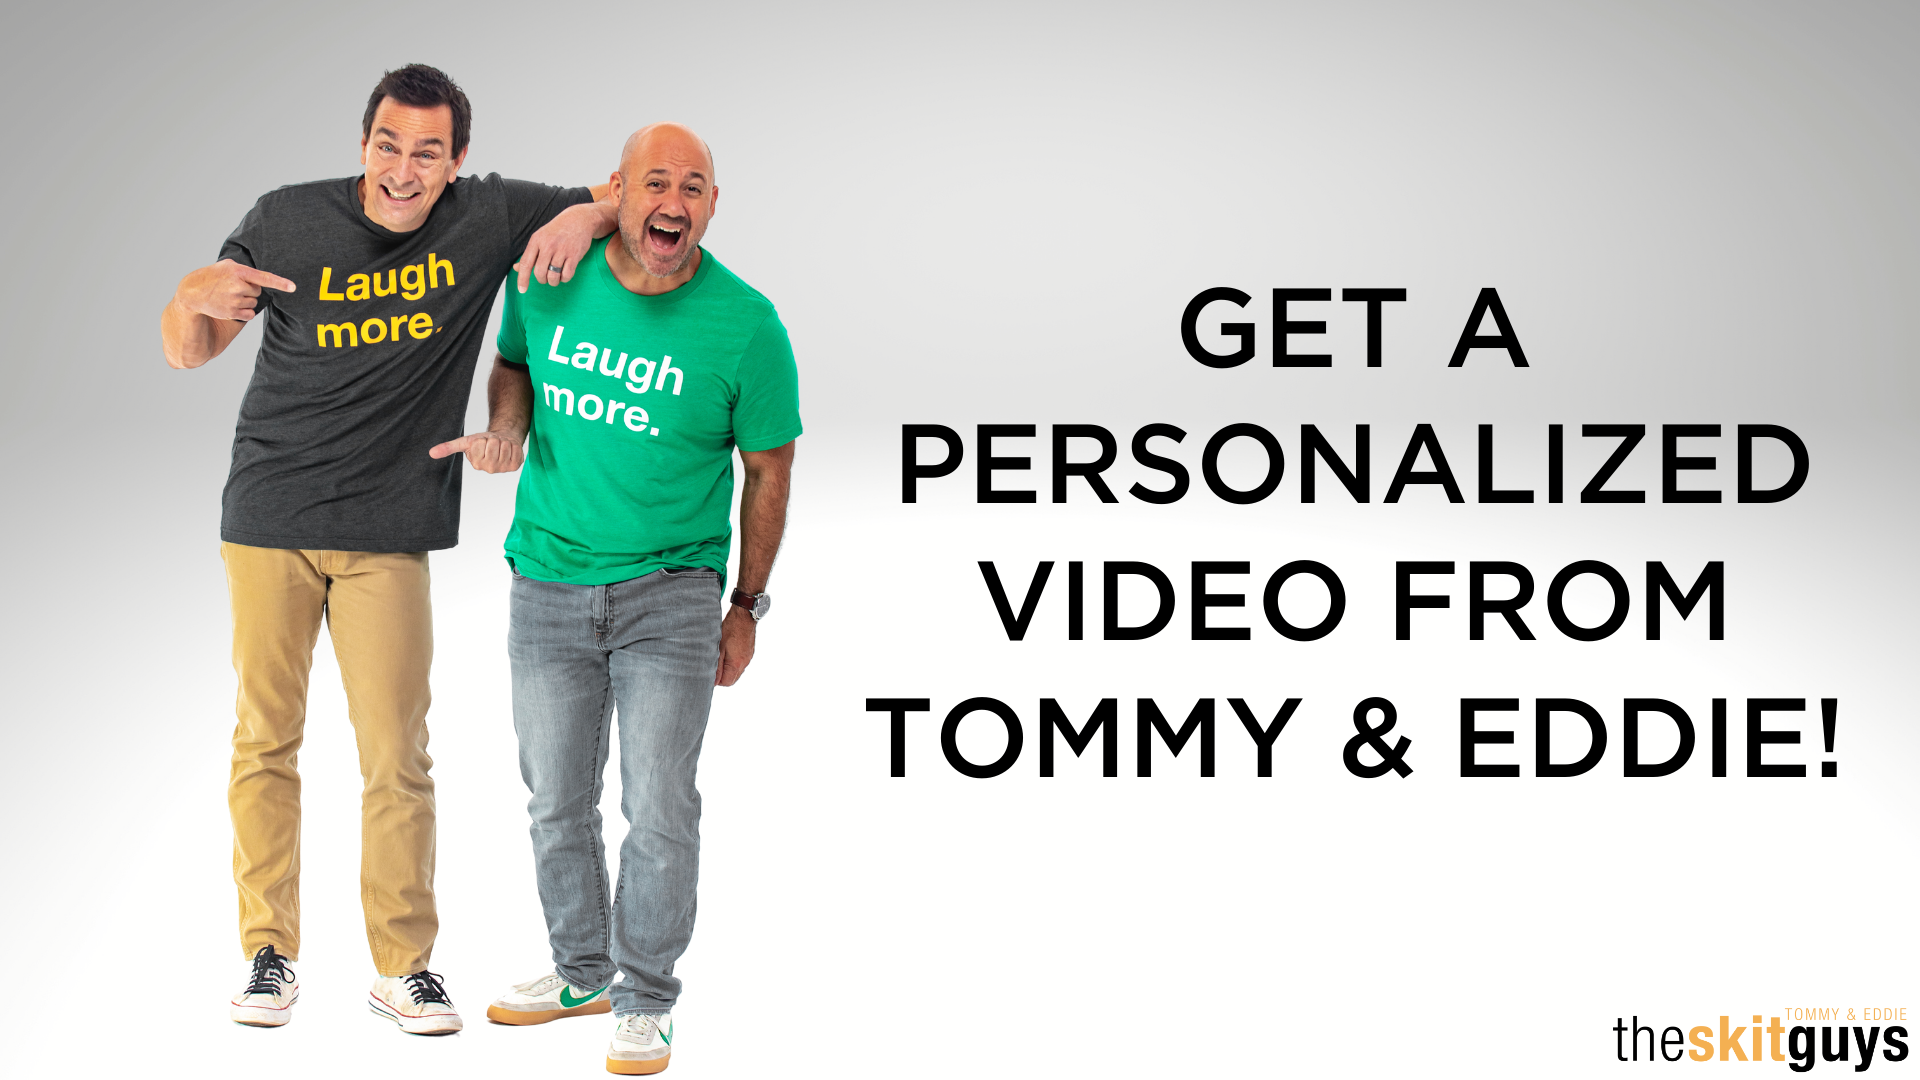 Get a personalized video from Tommy Eddie